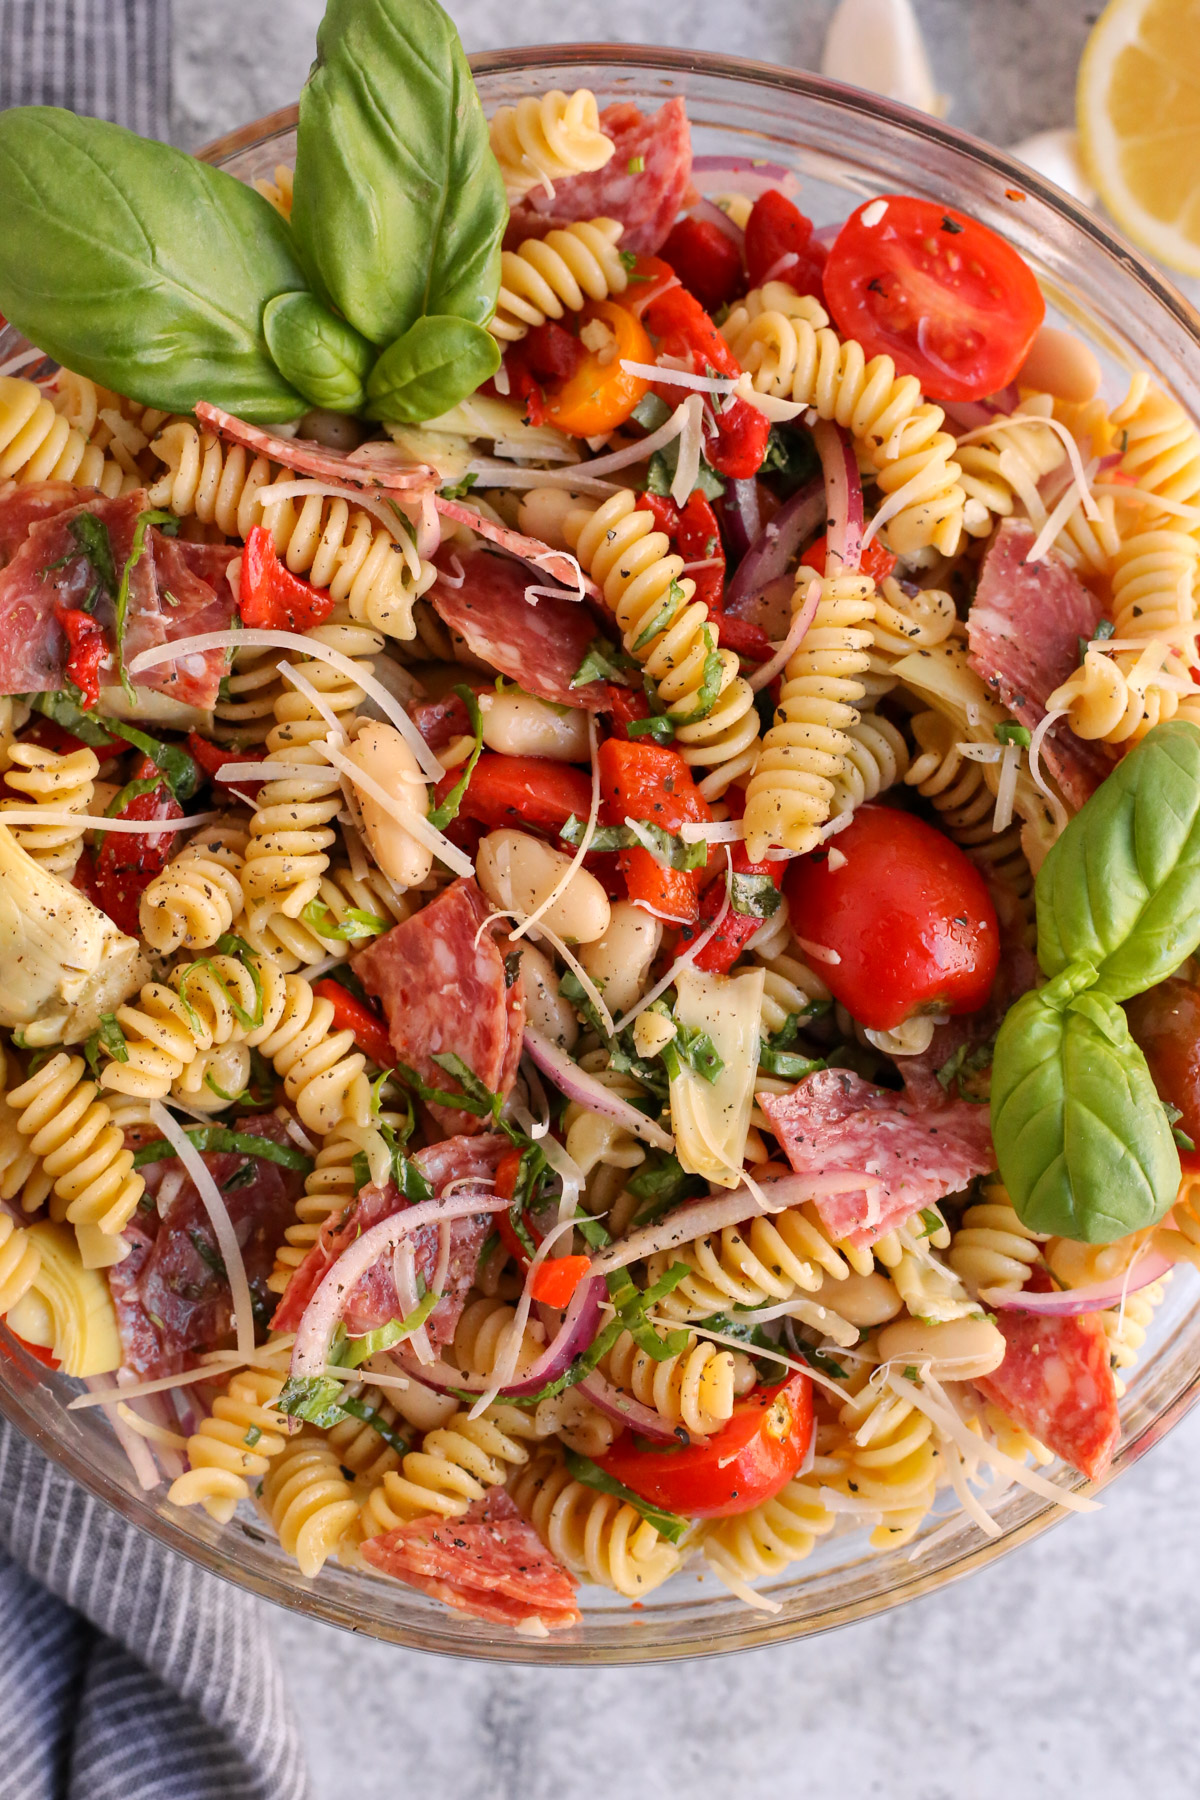 A closely cropped overhead view of antipasto pasta salad served in a clear glass mixing bowl and garnished with fresh basil, shredded parmesan cheese, and Italian herbs